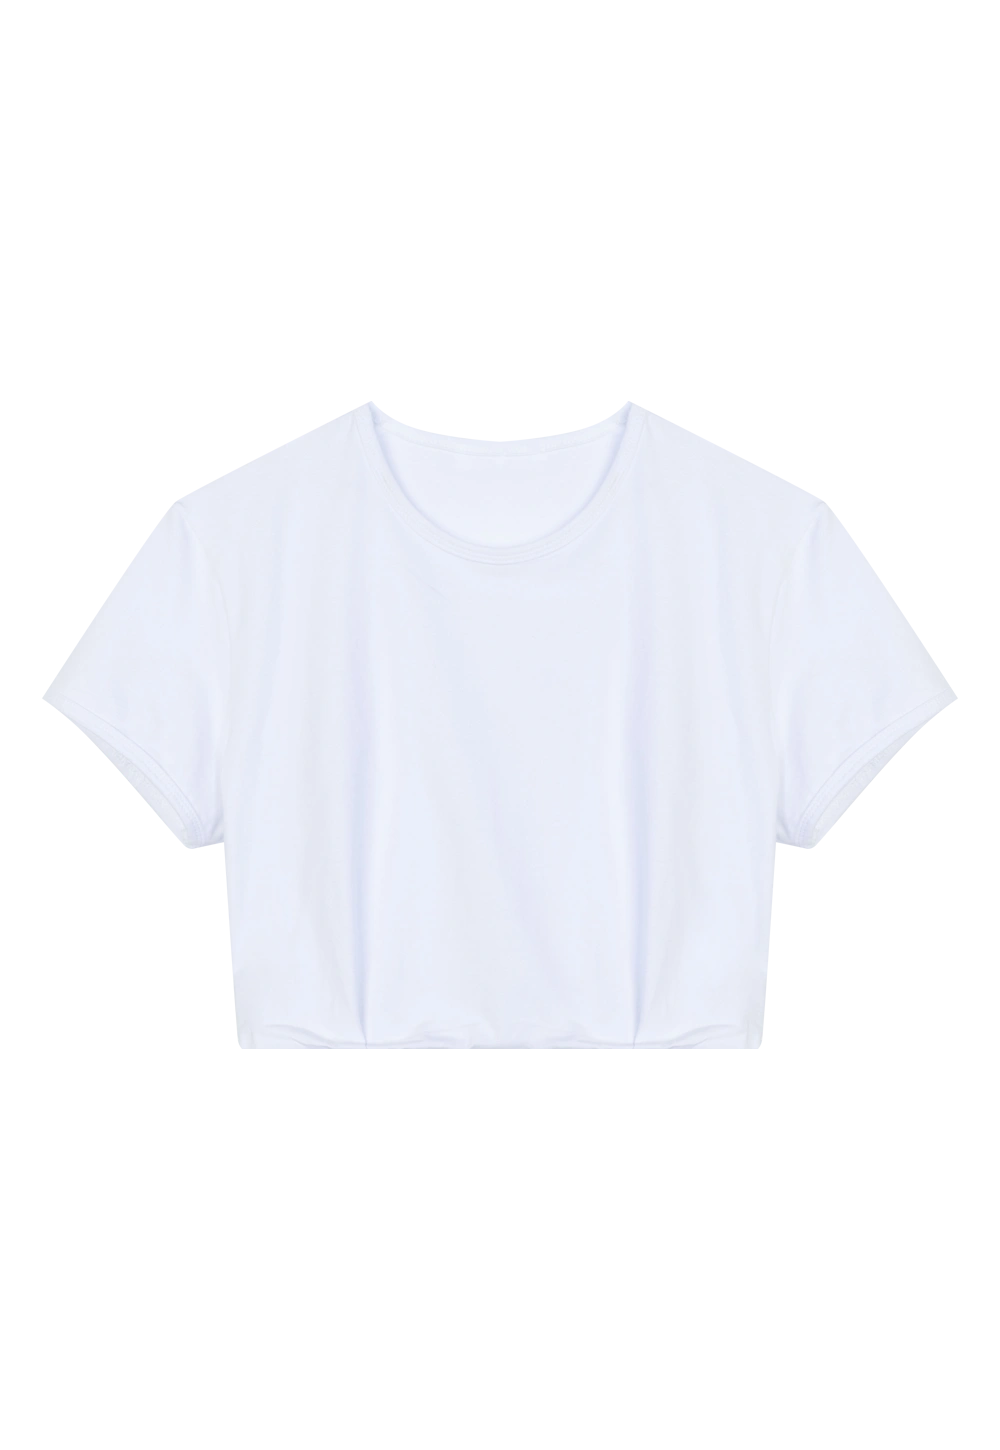 Cropped T-Shirt - Comfortable and Versatile